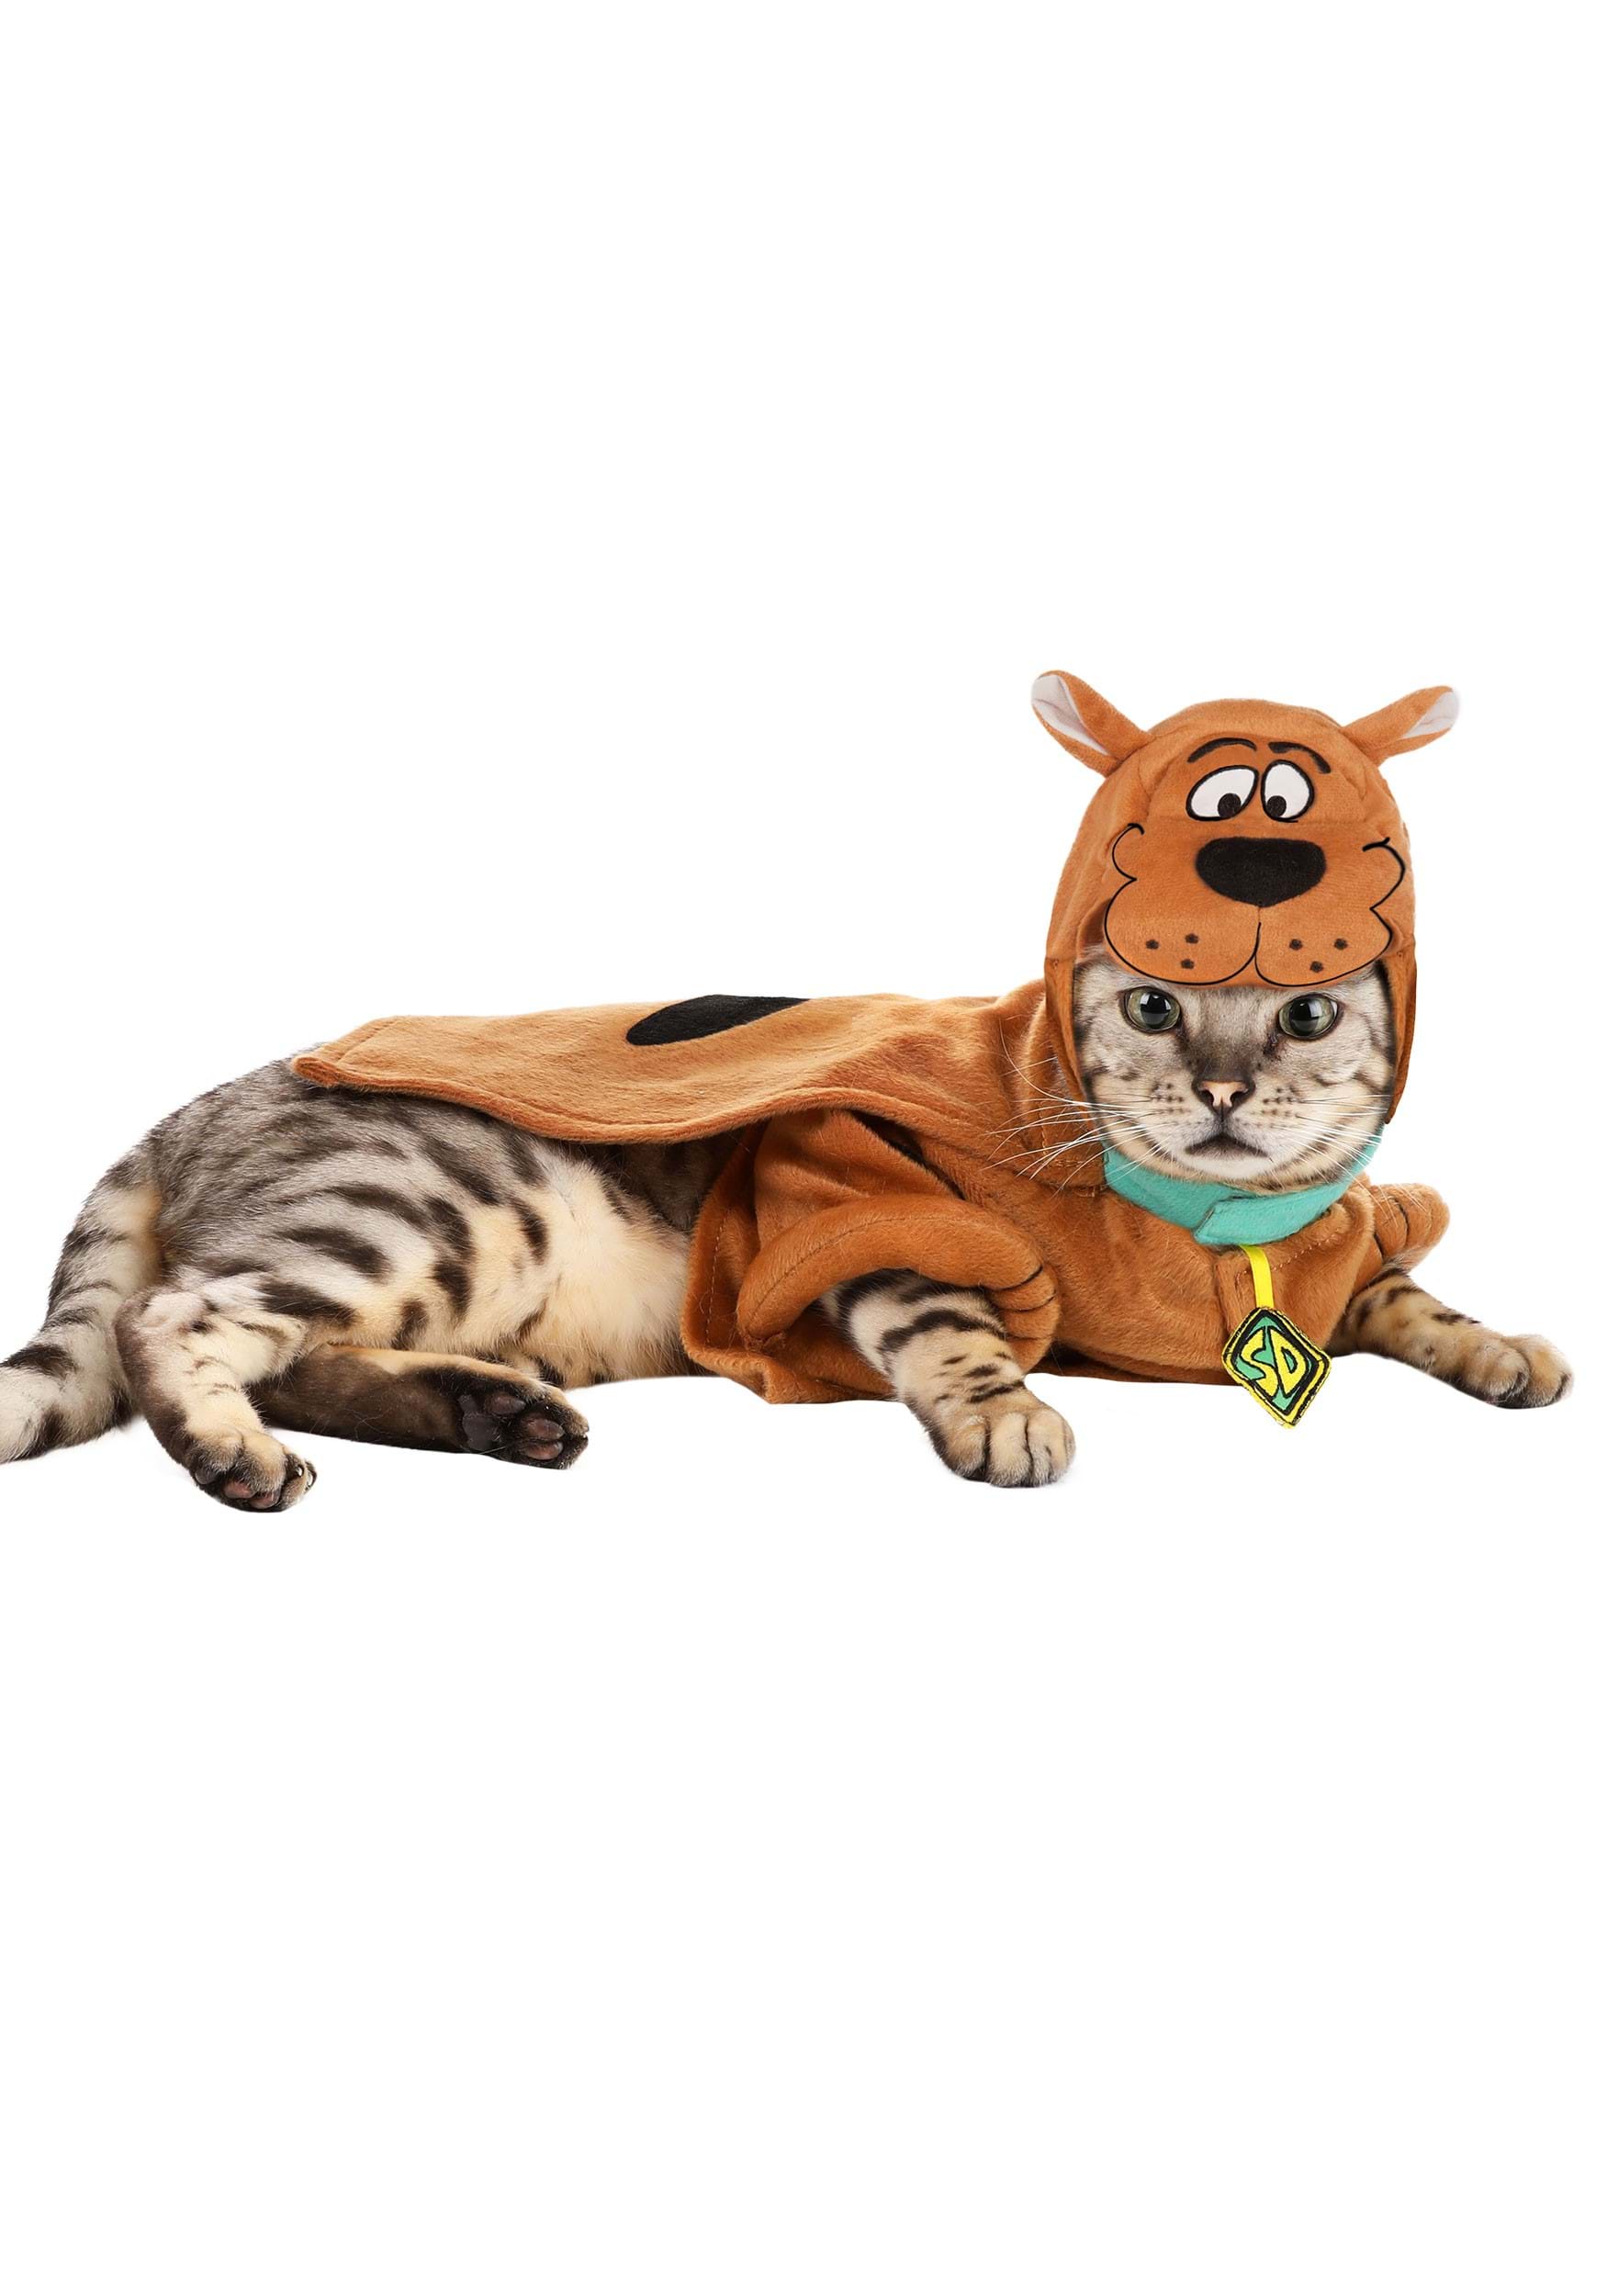 Scooby Doo Scooby Costume For Pets